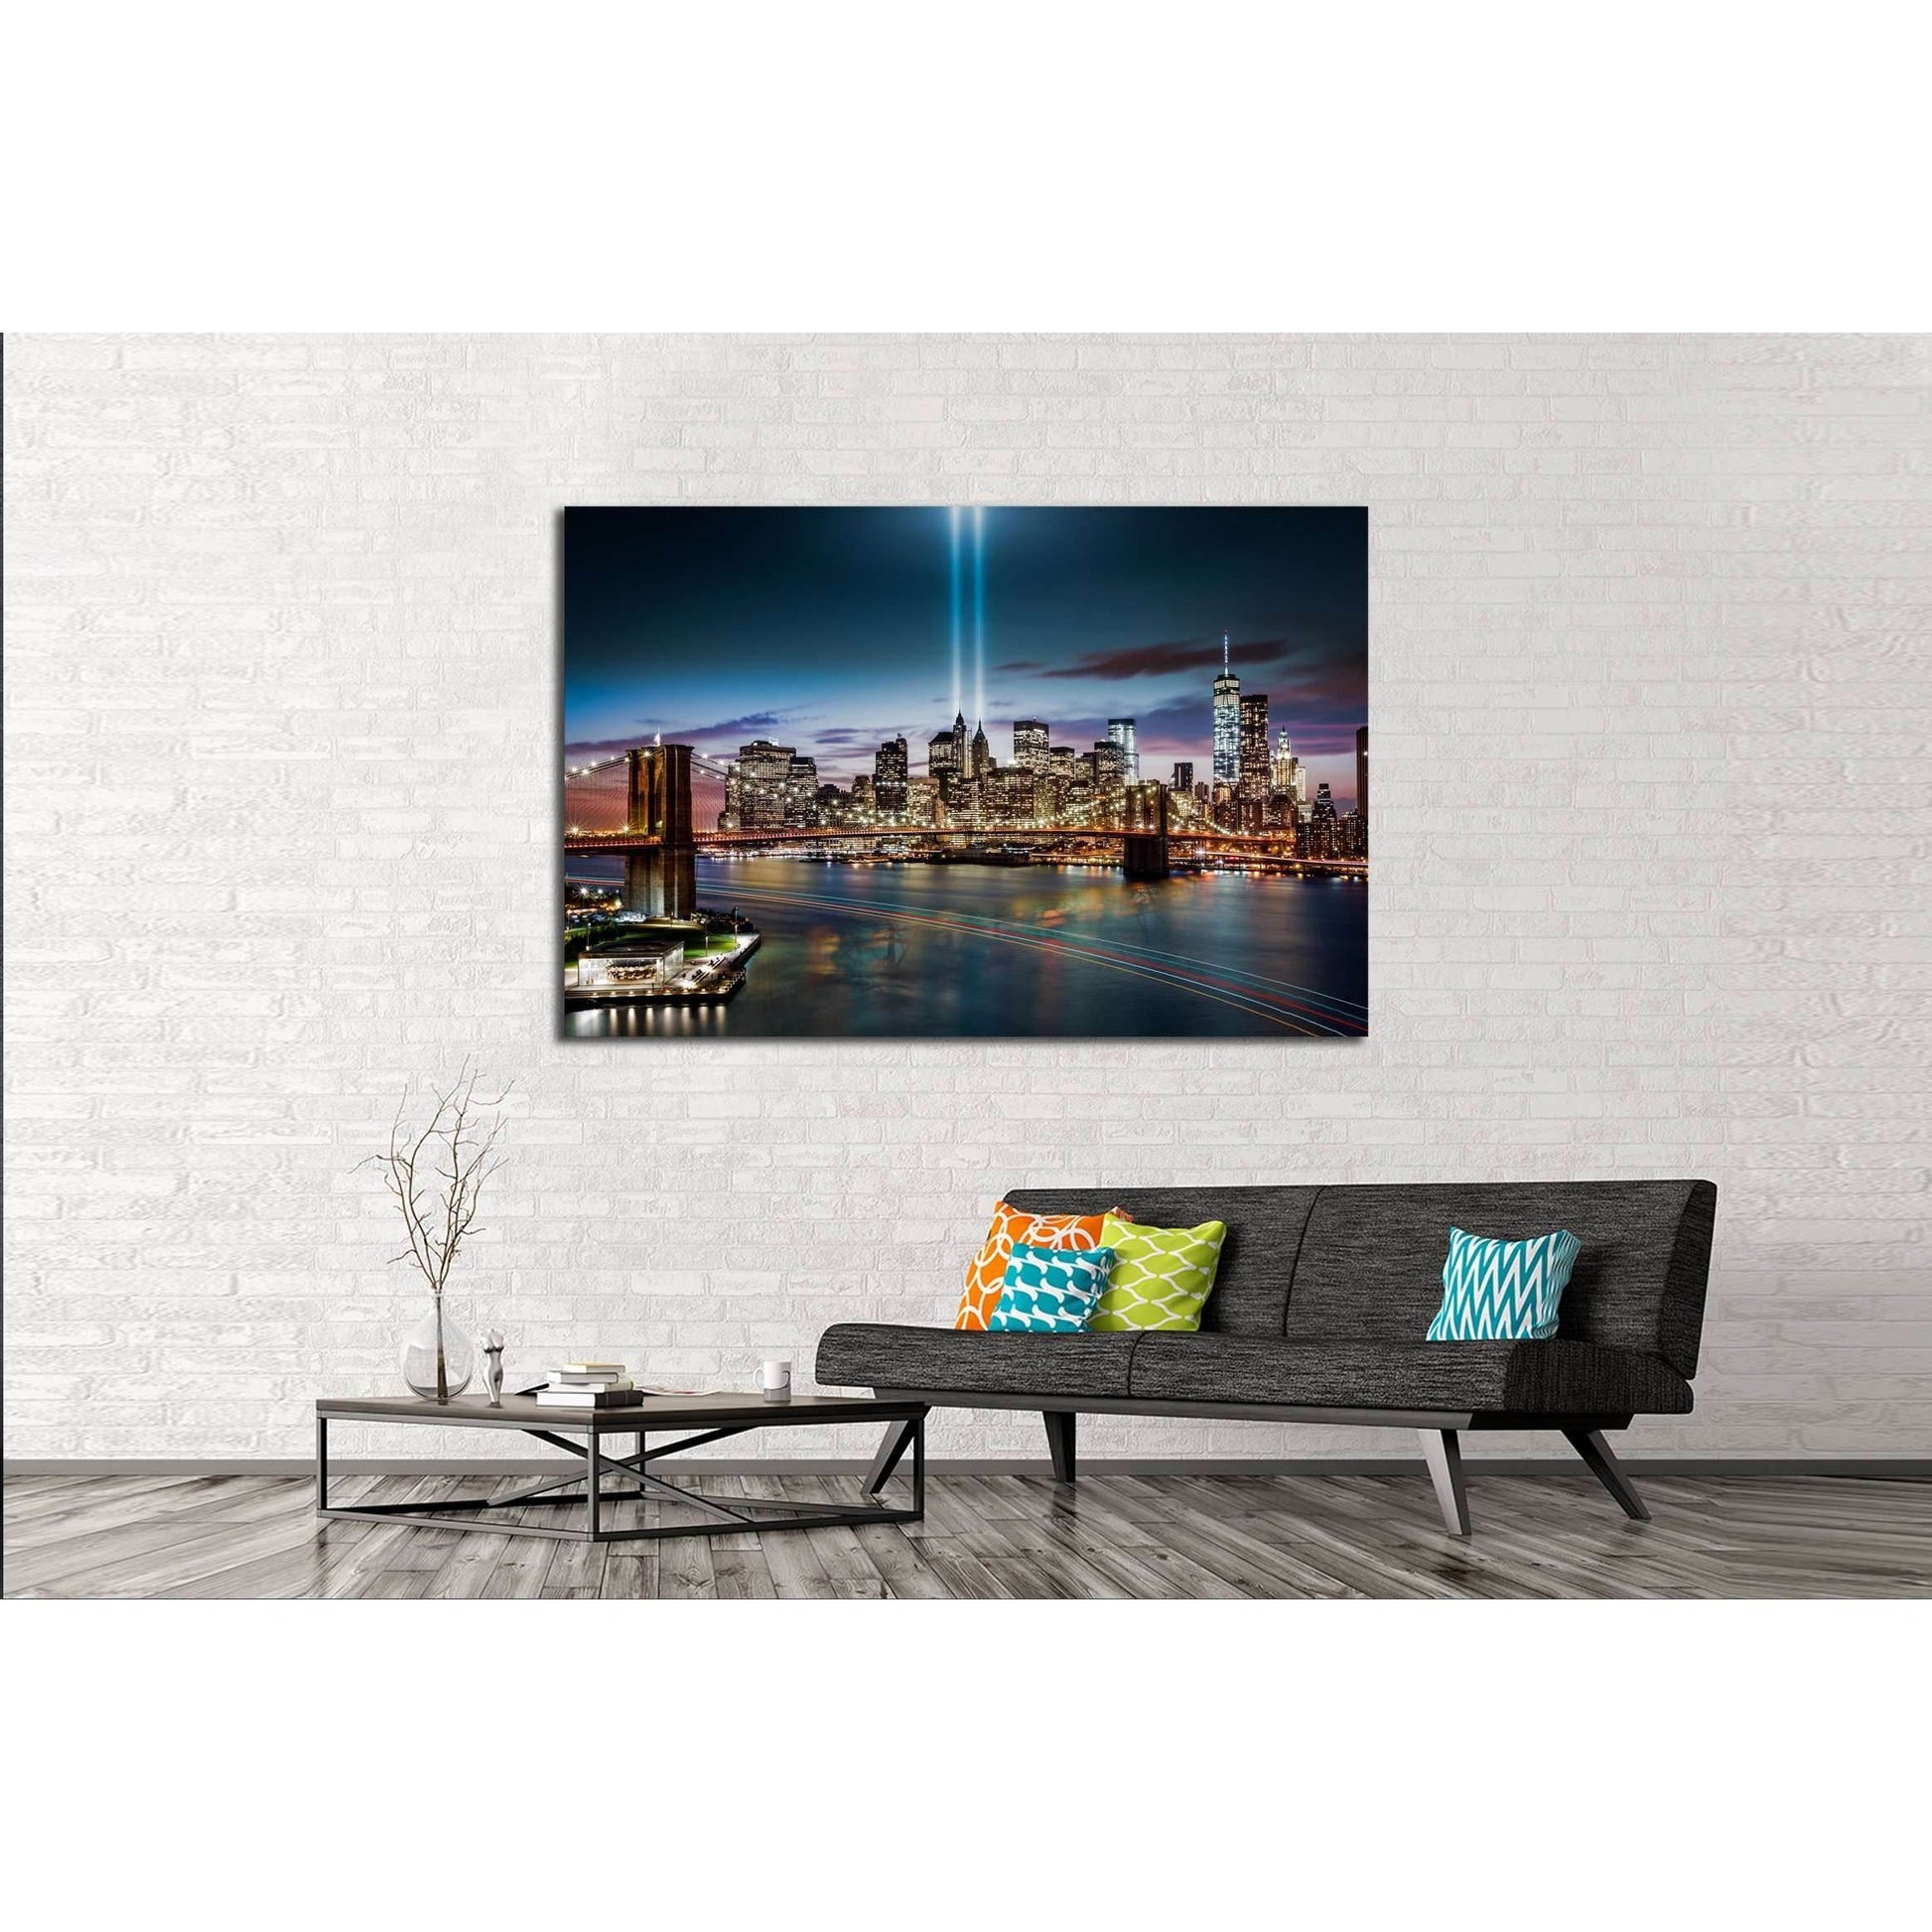 Brooklyn Bridge and the Lower Manhattan Skyline Canvas PrintDecorate your walls with a stunning Brooklyn Bridge & Lower Manhattan Skyline Canvas Art Print from the world's largest art gallery. Choose from thousands of Brooklyn Bridge artworks with various